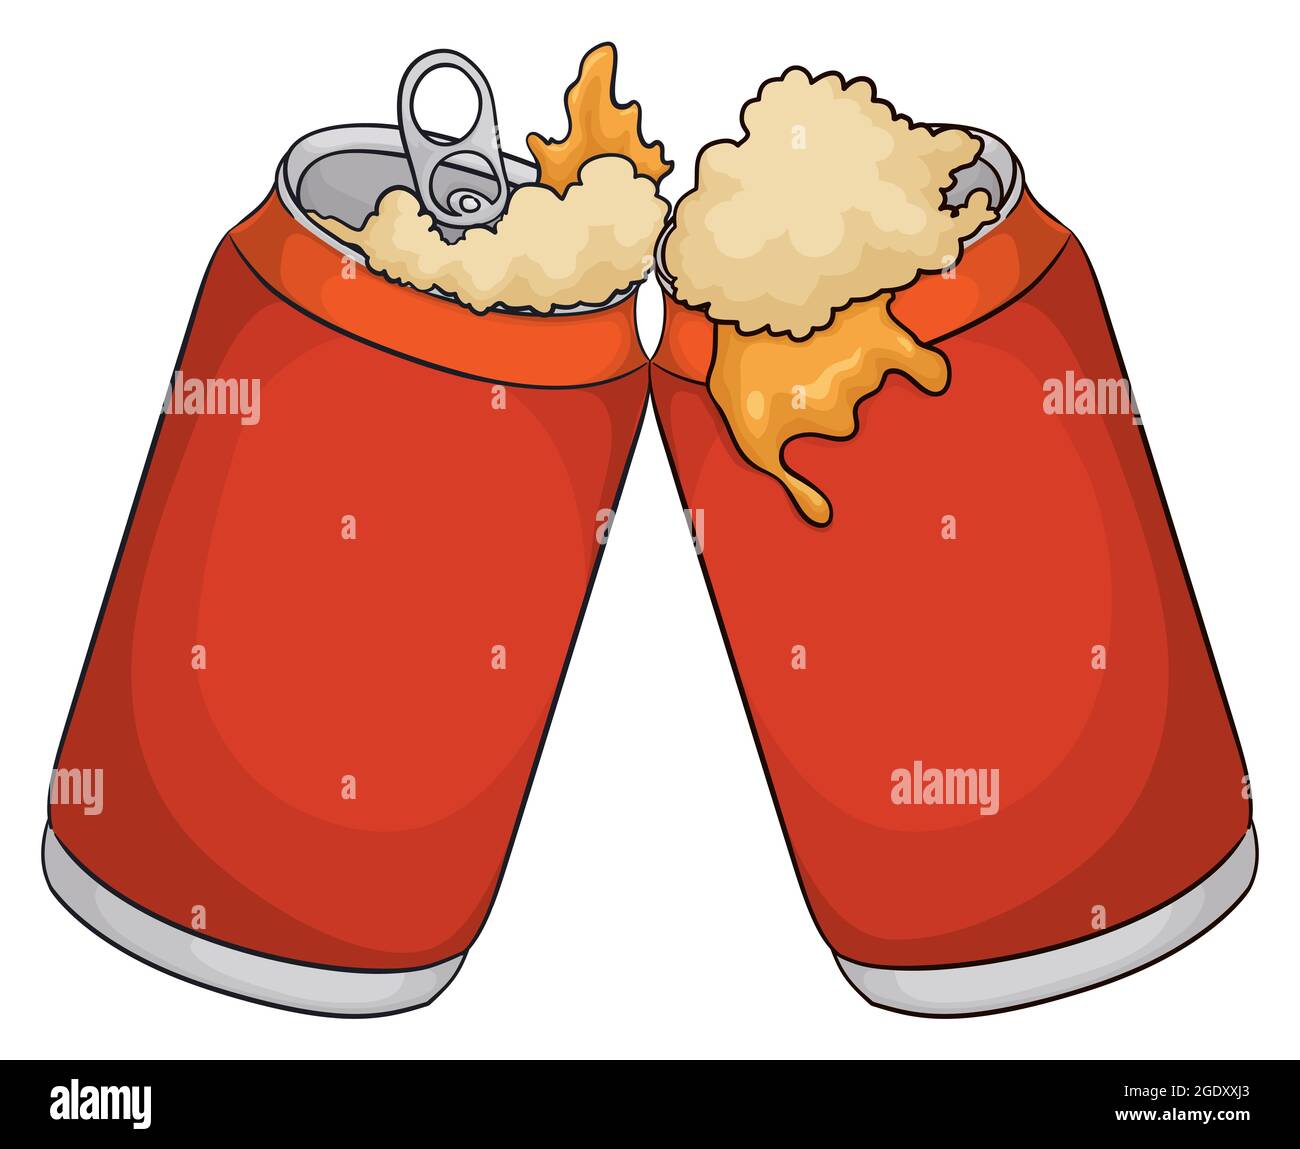 Two opened beer cans toasting, spilling liquid and froth, in cartoon style. Stock Vector